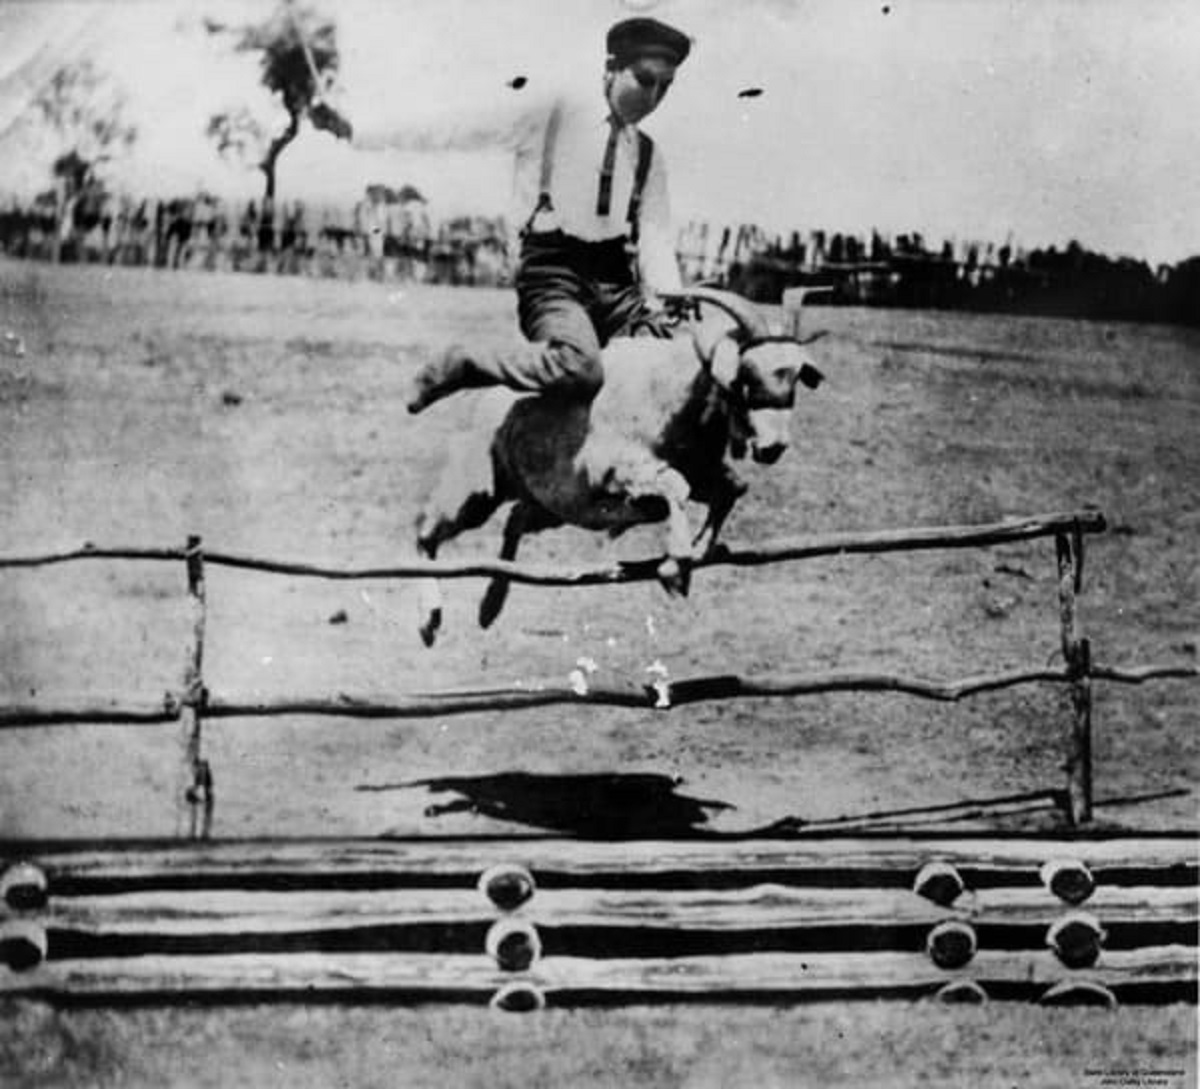 Roy Dunn And Tiger The Goat Setting A Record For Highest Jump For A Goat, 1905